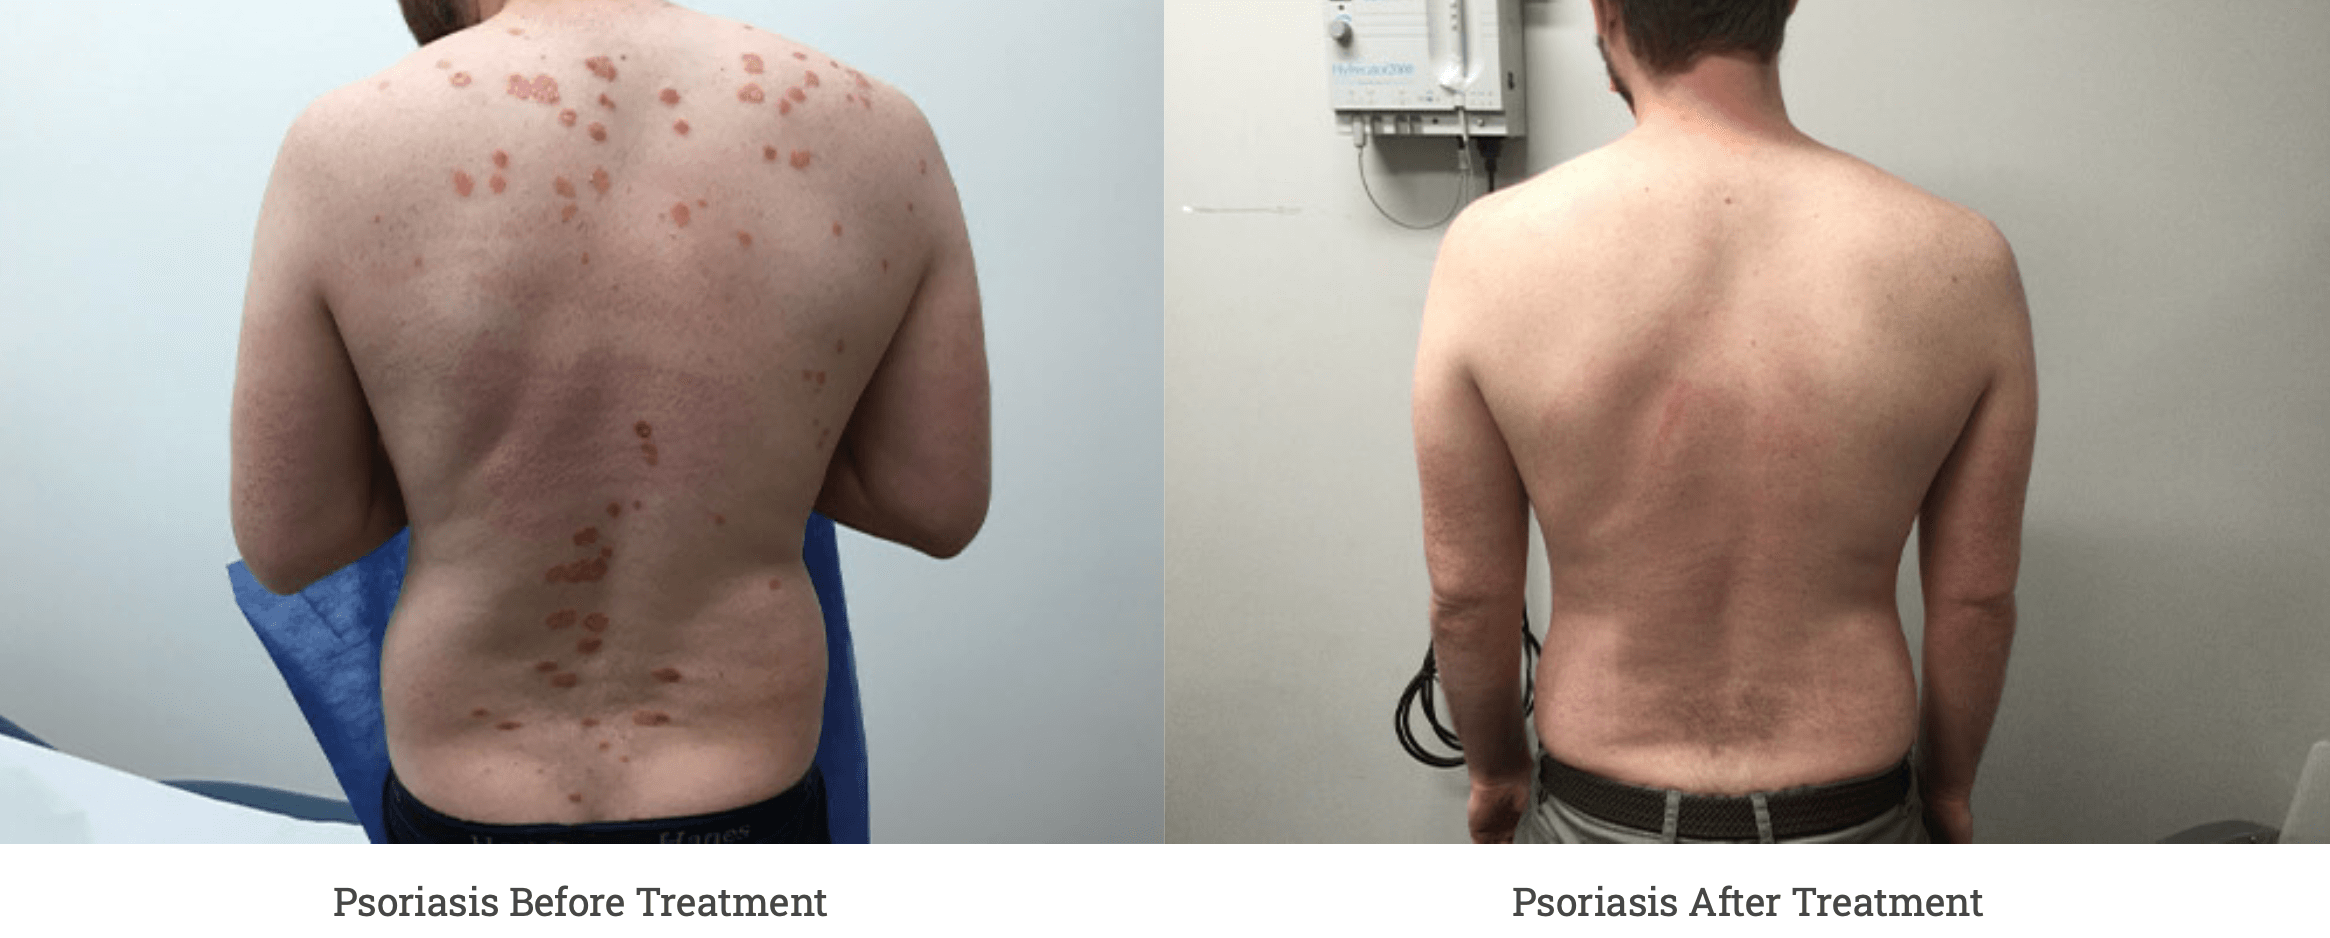 Before and After PSORIASIS treatment